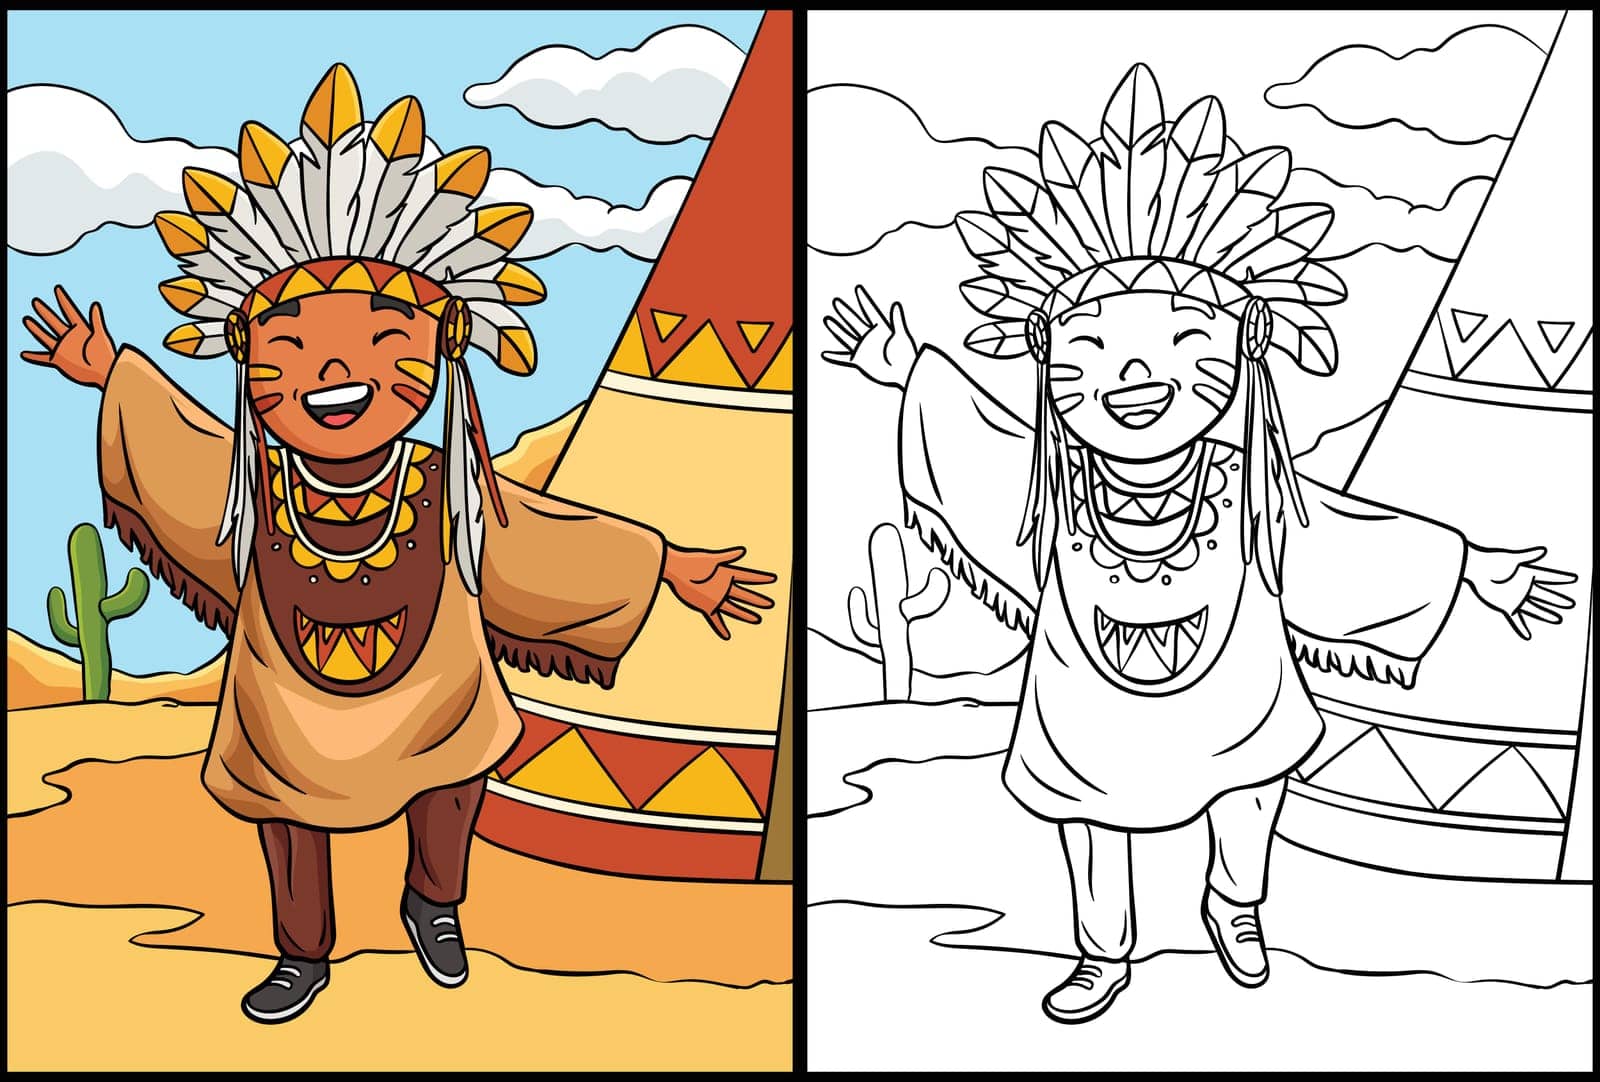 This coloring page shows a Happy Native American Indian Girl. One side of this illustration is colored and serves as an inspiration for children.